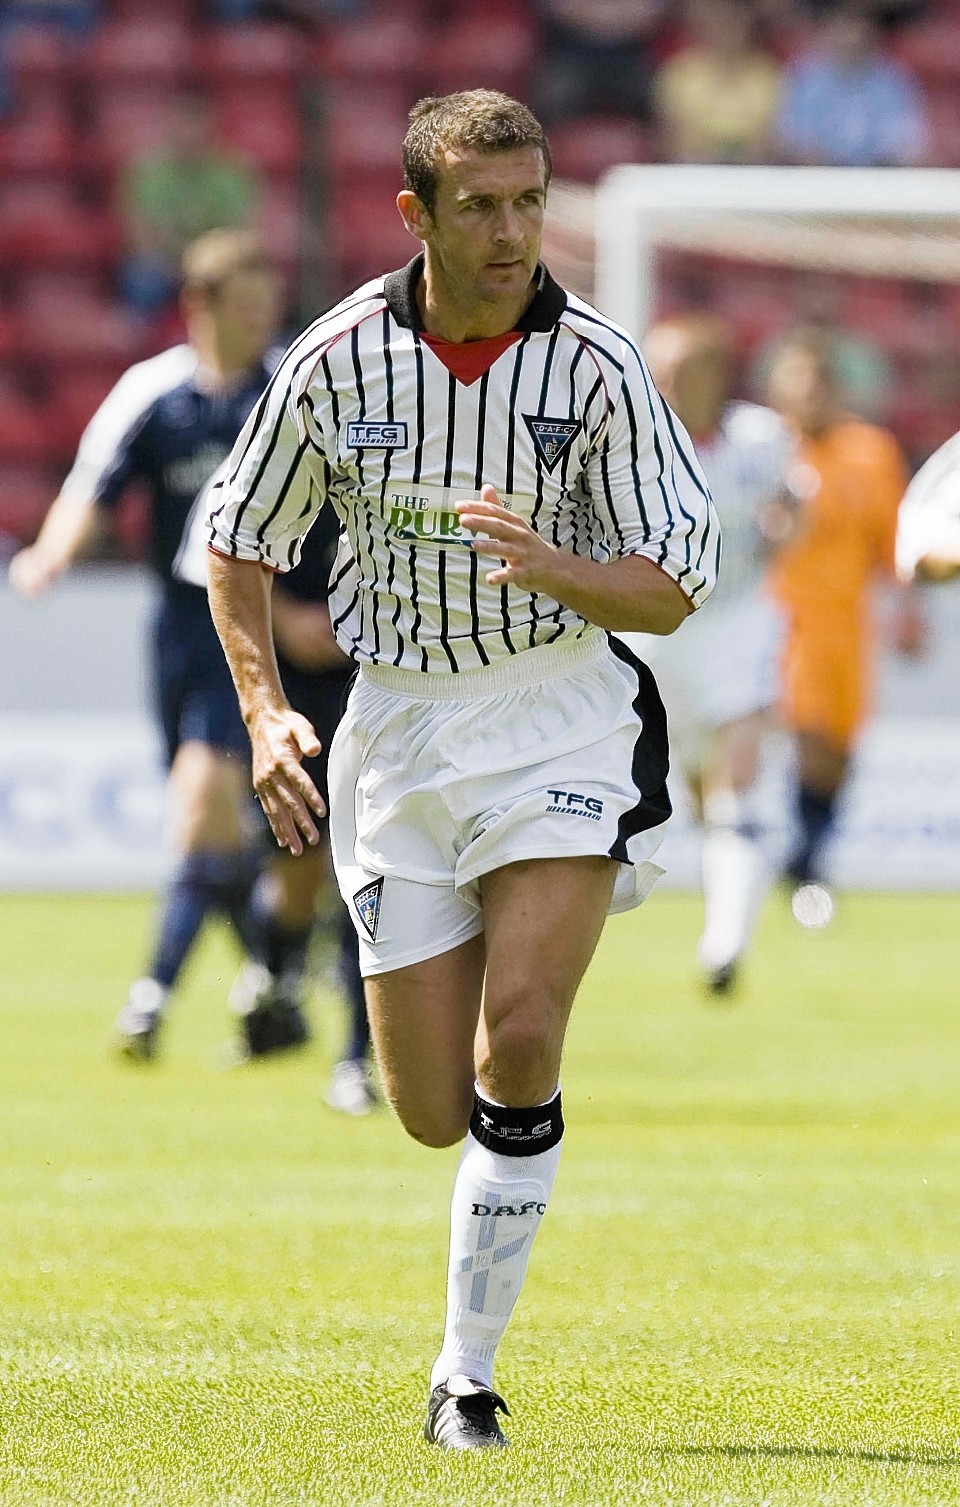 Jim Mcintyre playing for Dunfermline 